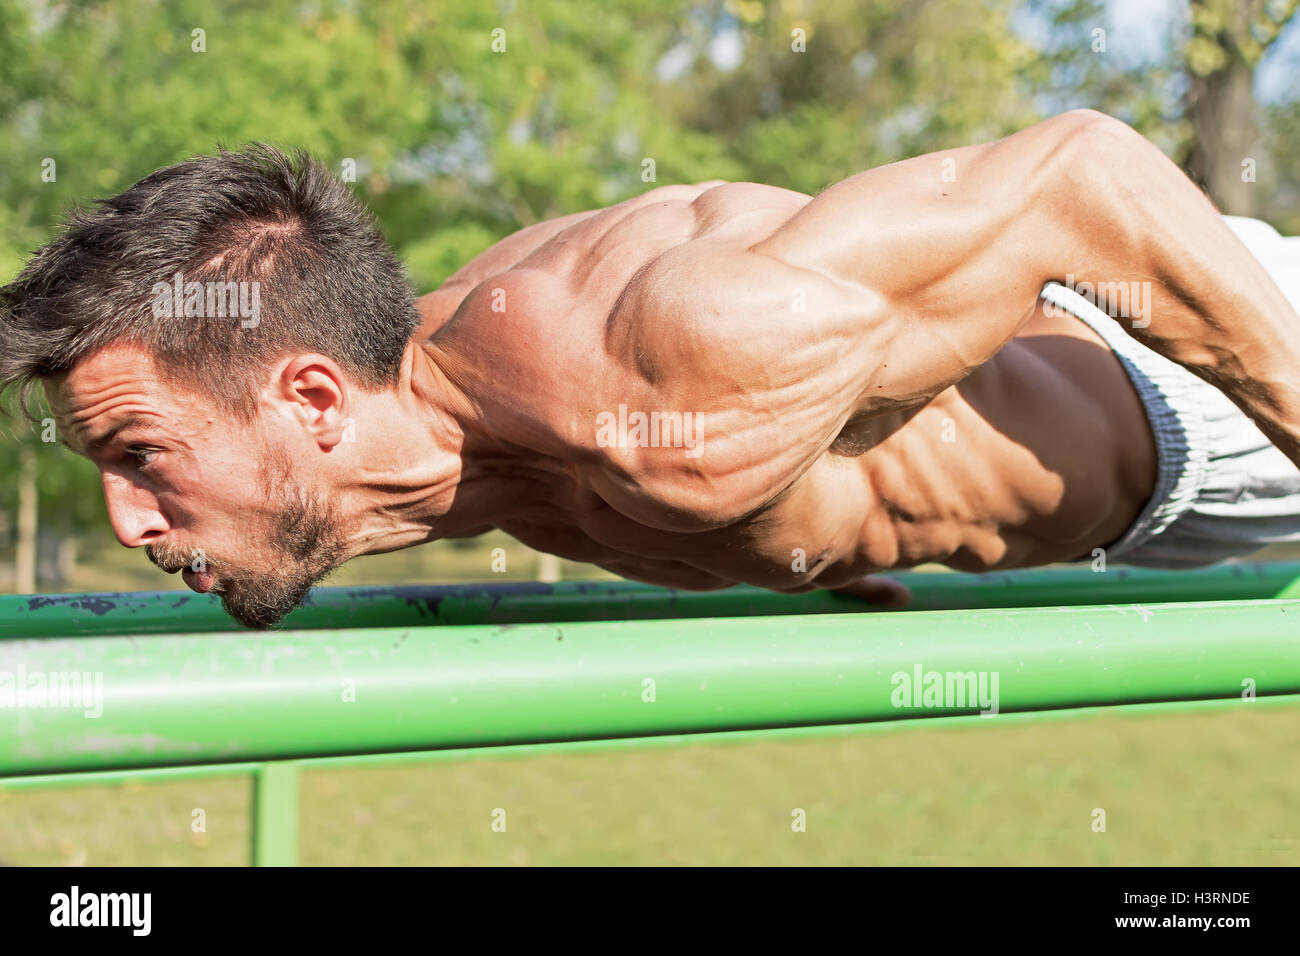 Strong Athletic Man Working Out in an Outdoor Gym. Street Workout Exercises. Tense Muscles. Extreme Sports. Stock Photo